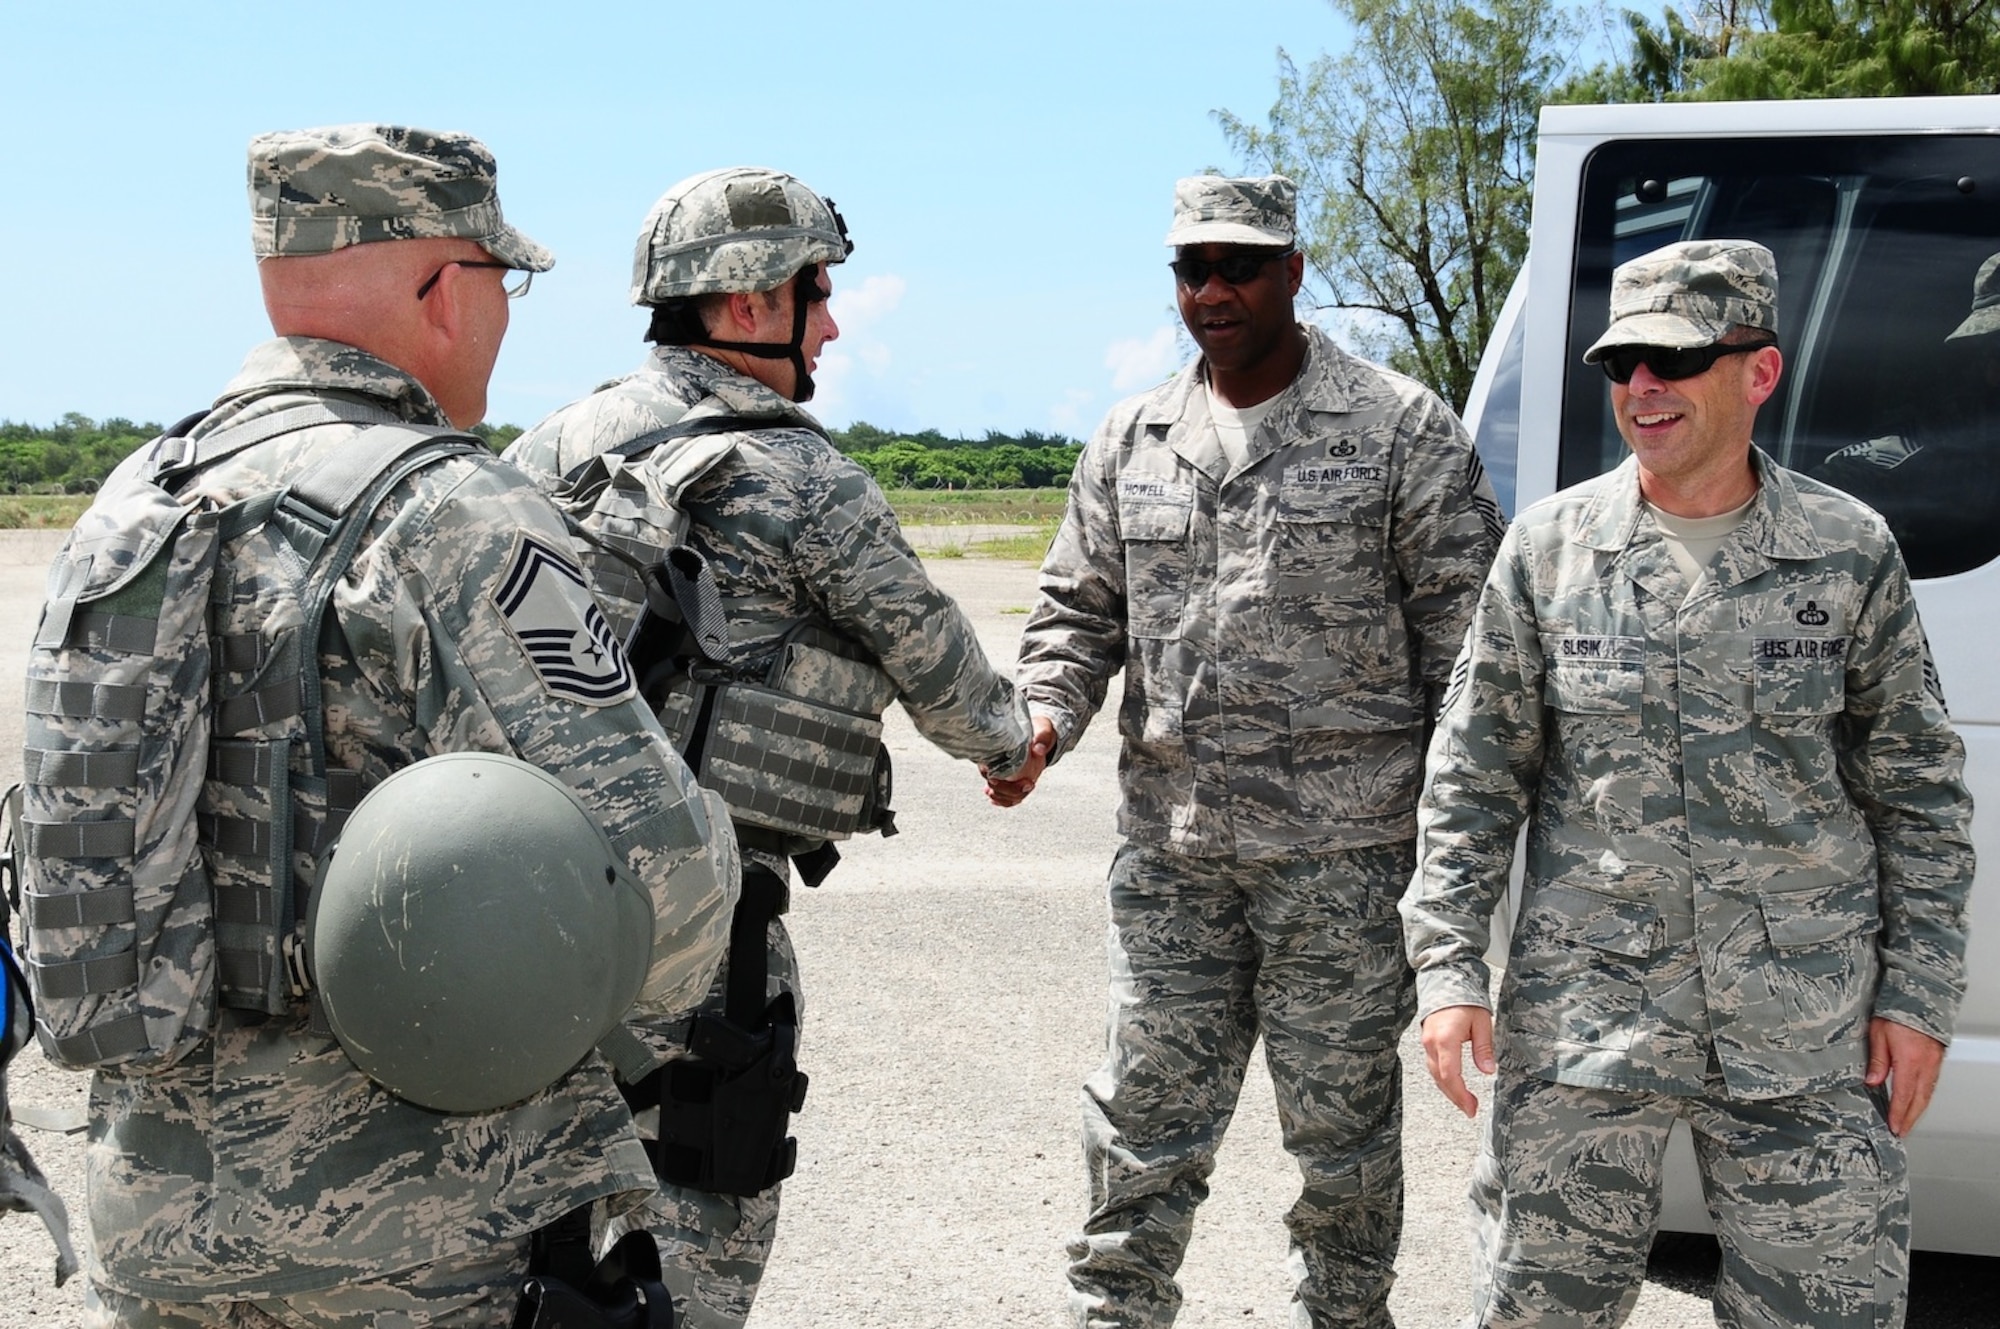 Lt. Col. Michael Black, 36th Mobility Response Squadron commander, and Senior Master Sgt. Rick Schlachter, 736th Security Forces squadron senior enlisted advisor to the site commander, welcomes Chief Master Sgt. James Slisik, 36th Wing command chief, and Chief Master Sgt. Joseph Howell, 36th Contingency Response Group superintendent, along with the other senior noncommissioned officers visiting the exercise site at Northwest Field, Guam, June 6. The 36th Contingency Response Group conducted a four-day exercise in order to hone their tactical skills, improve operational readiness and prepare for an upcoming unit compliance inspection. (U.S. Air Force photo by Airman 1st Class Marianique Santos/Released)